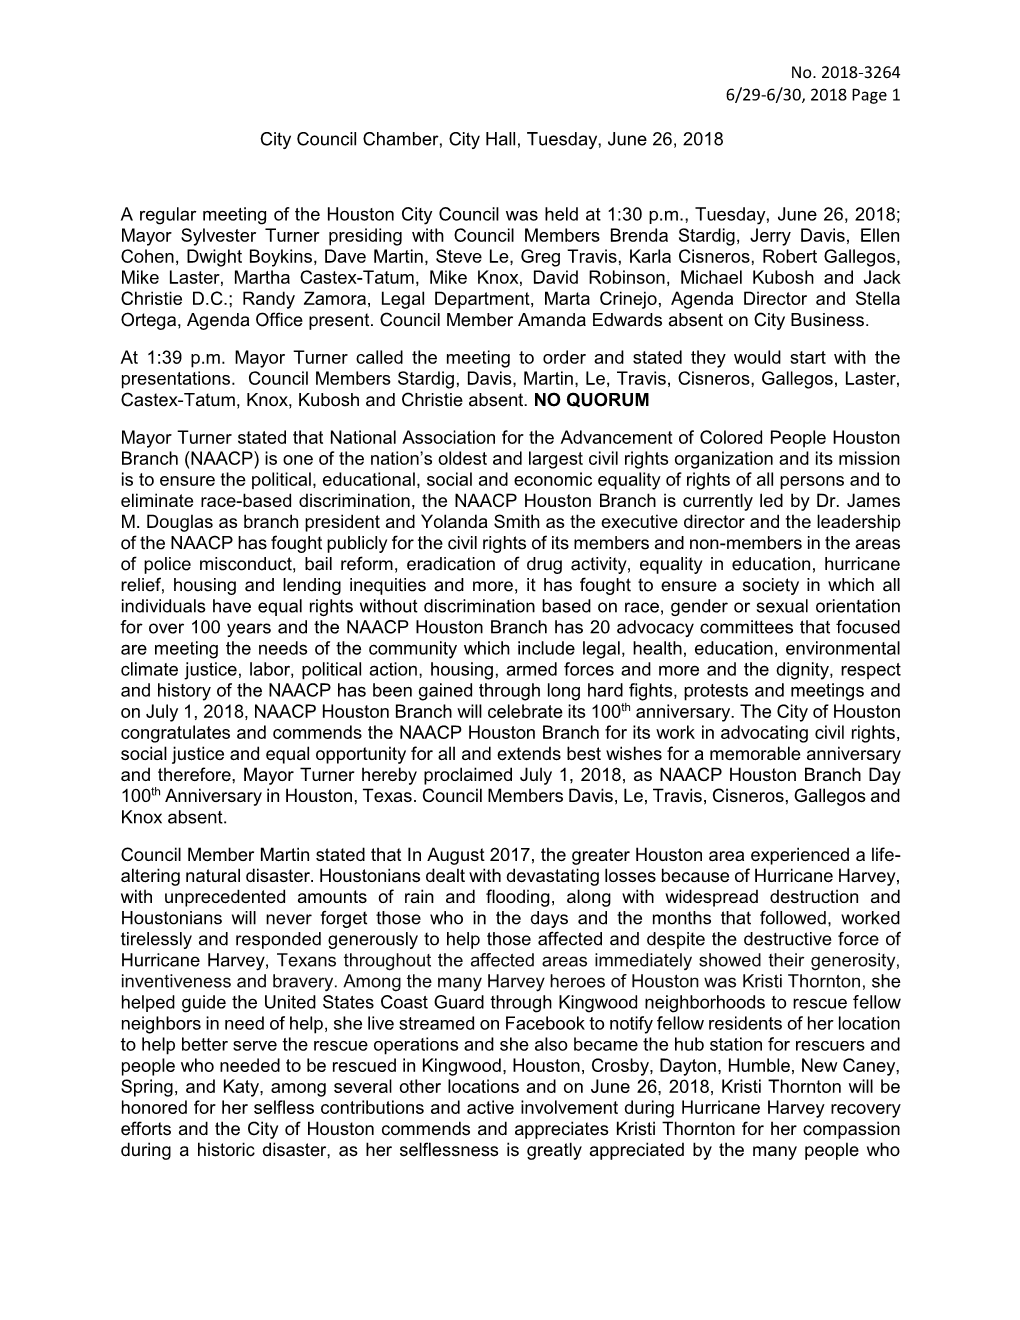 No. 2018-3264 6/29-6/30, 2018 Page 1 City Council Chamber, City Hall, Tuesday, June 26, 2018 a Regular Meeting of the Houston Ci